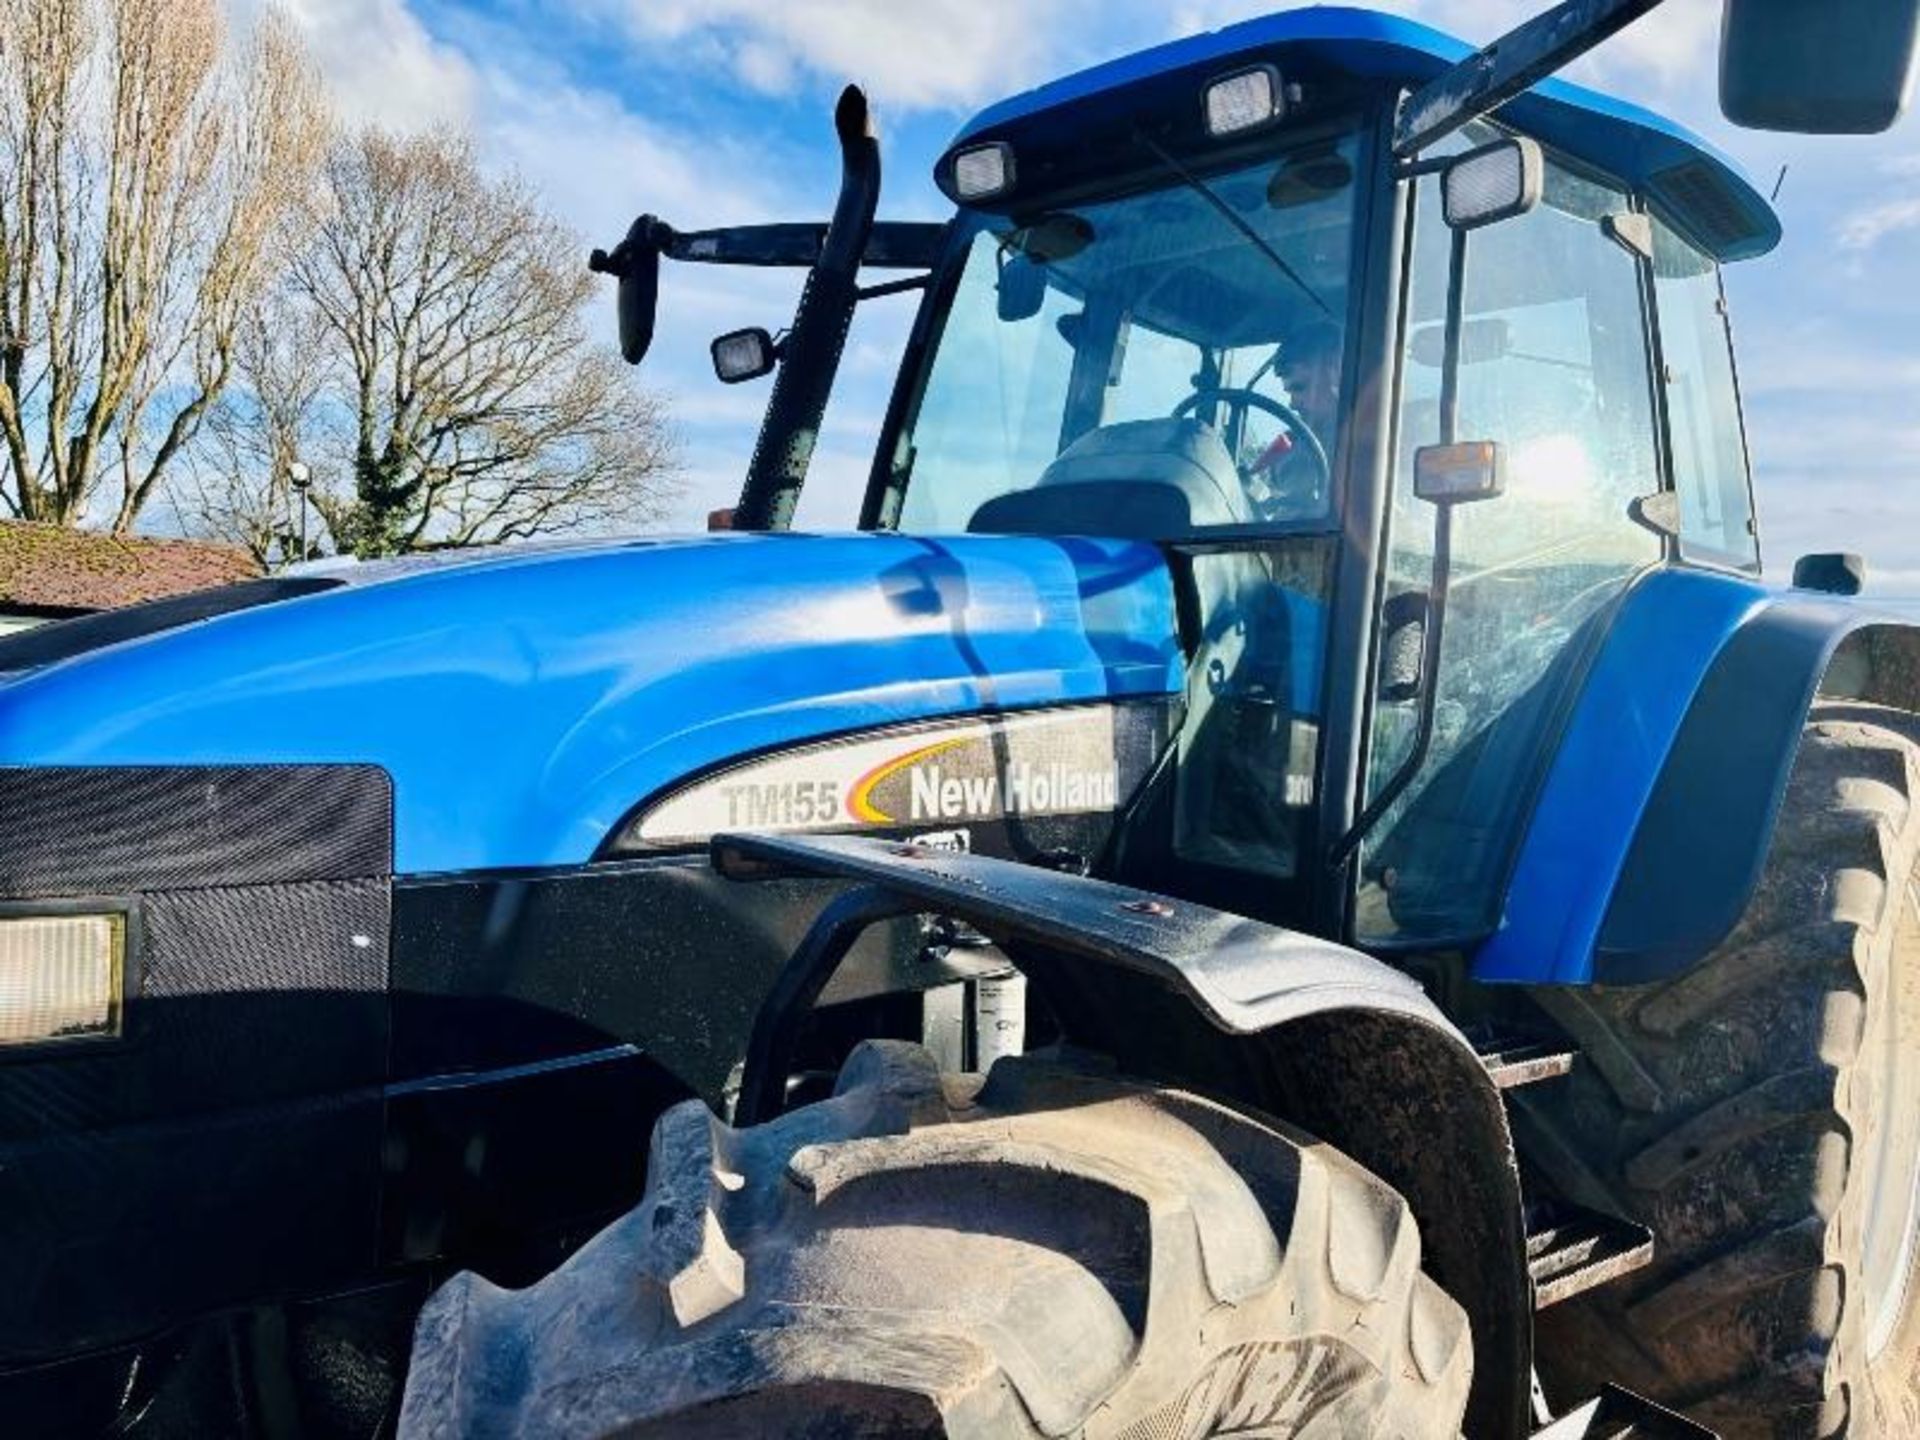 NEW HOLLAND TM155 4WD TRACTOR *5619 HOURS* C/W RANGE COMMAND GEAR BOX - Image 14 of 19